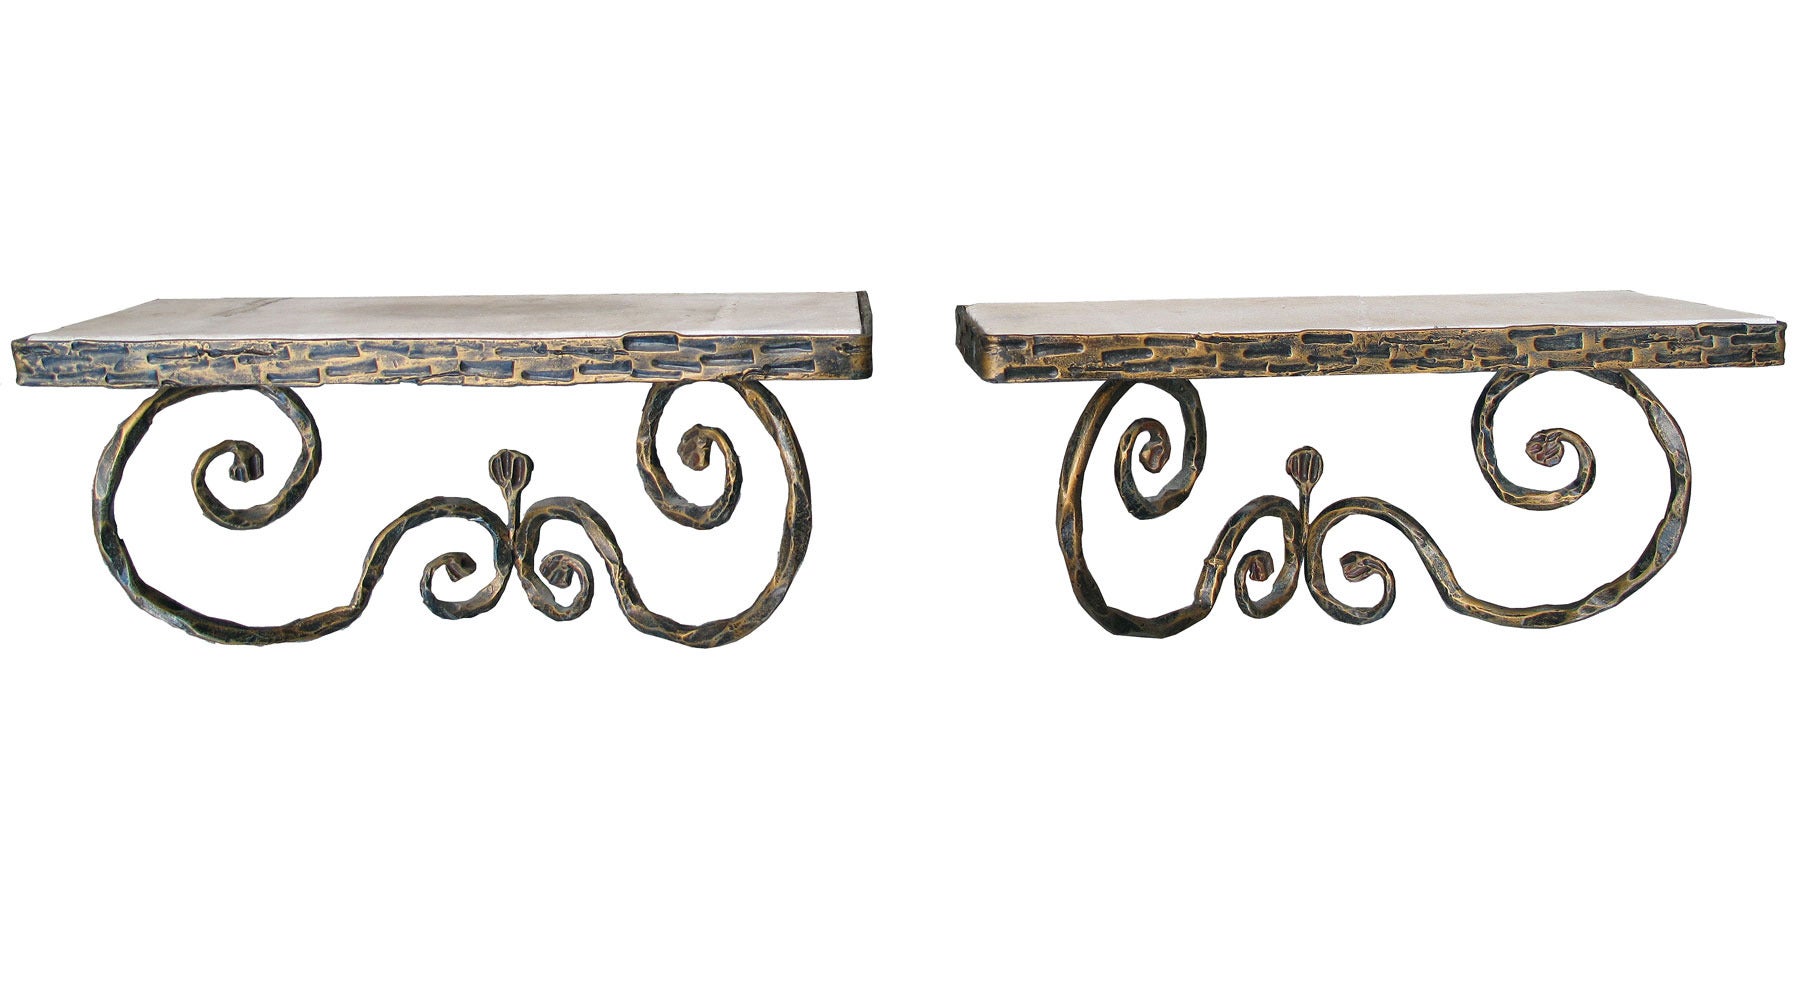 Pair of Neoclassical and Baroque Revival Shelves in Wrought Iron